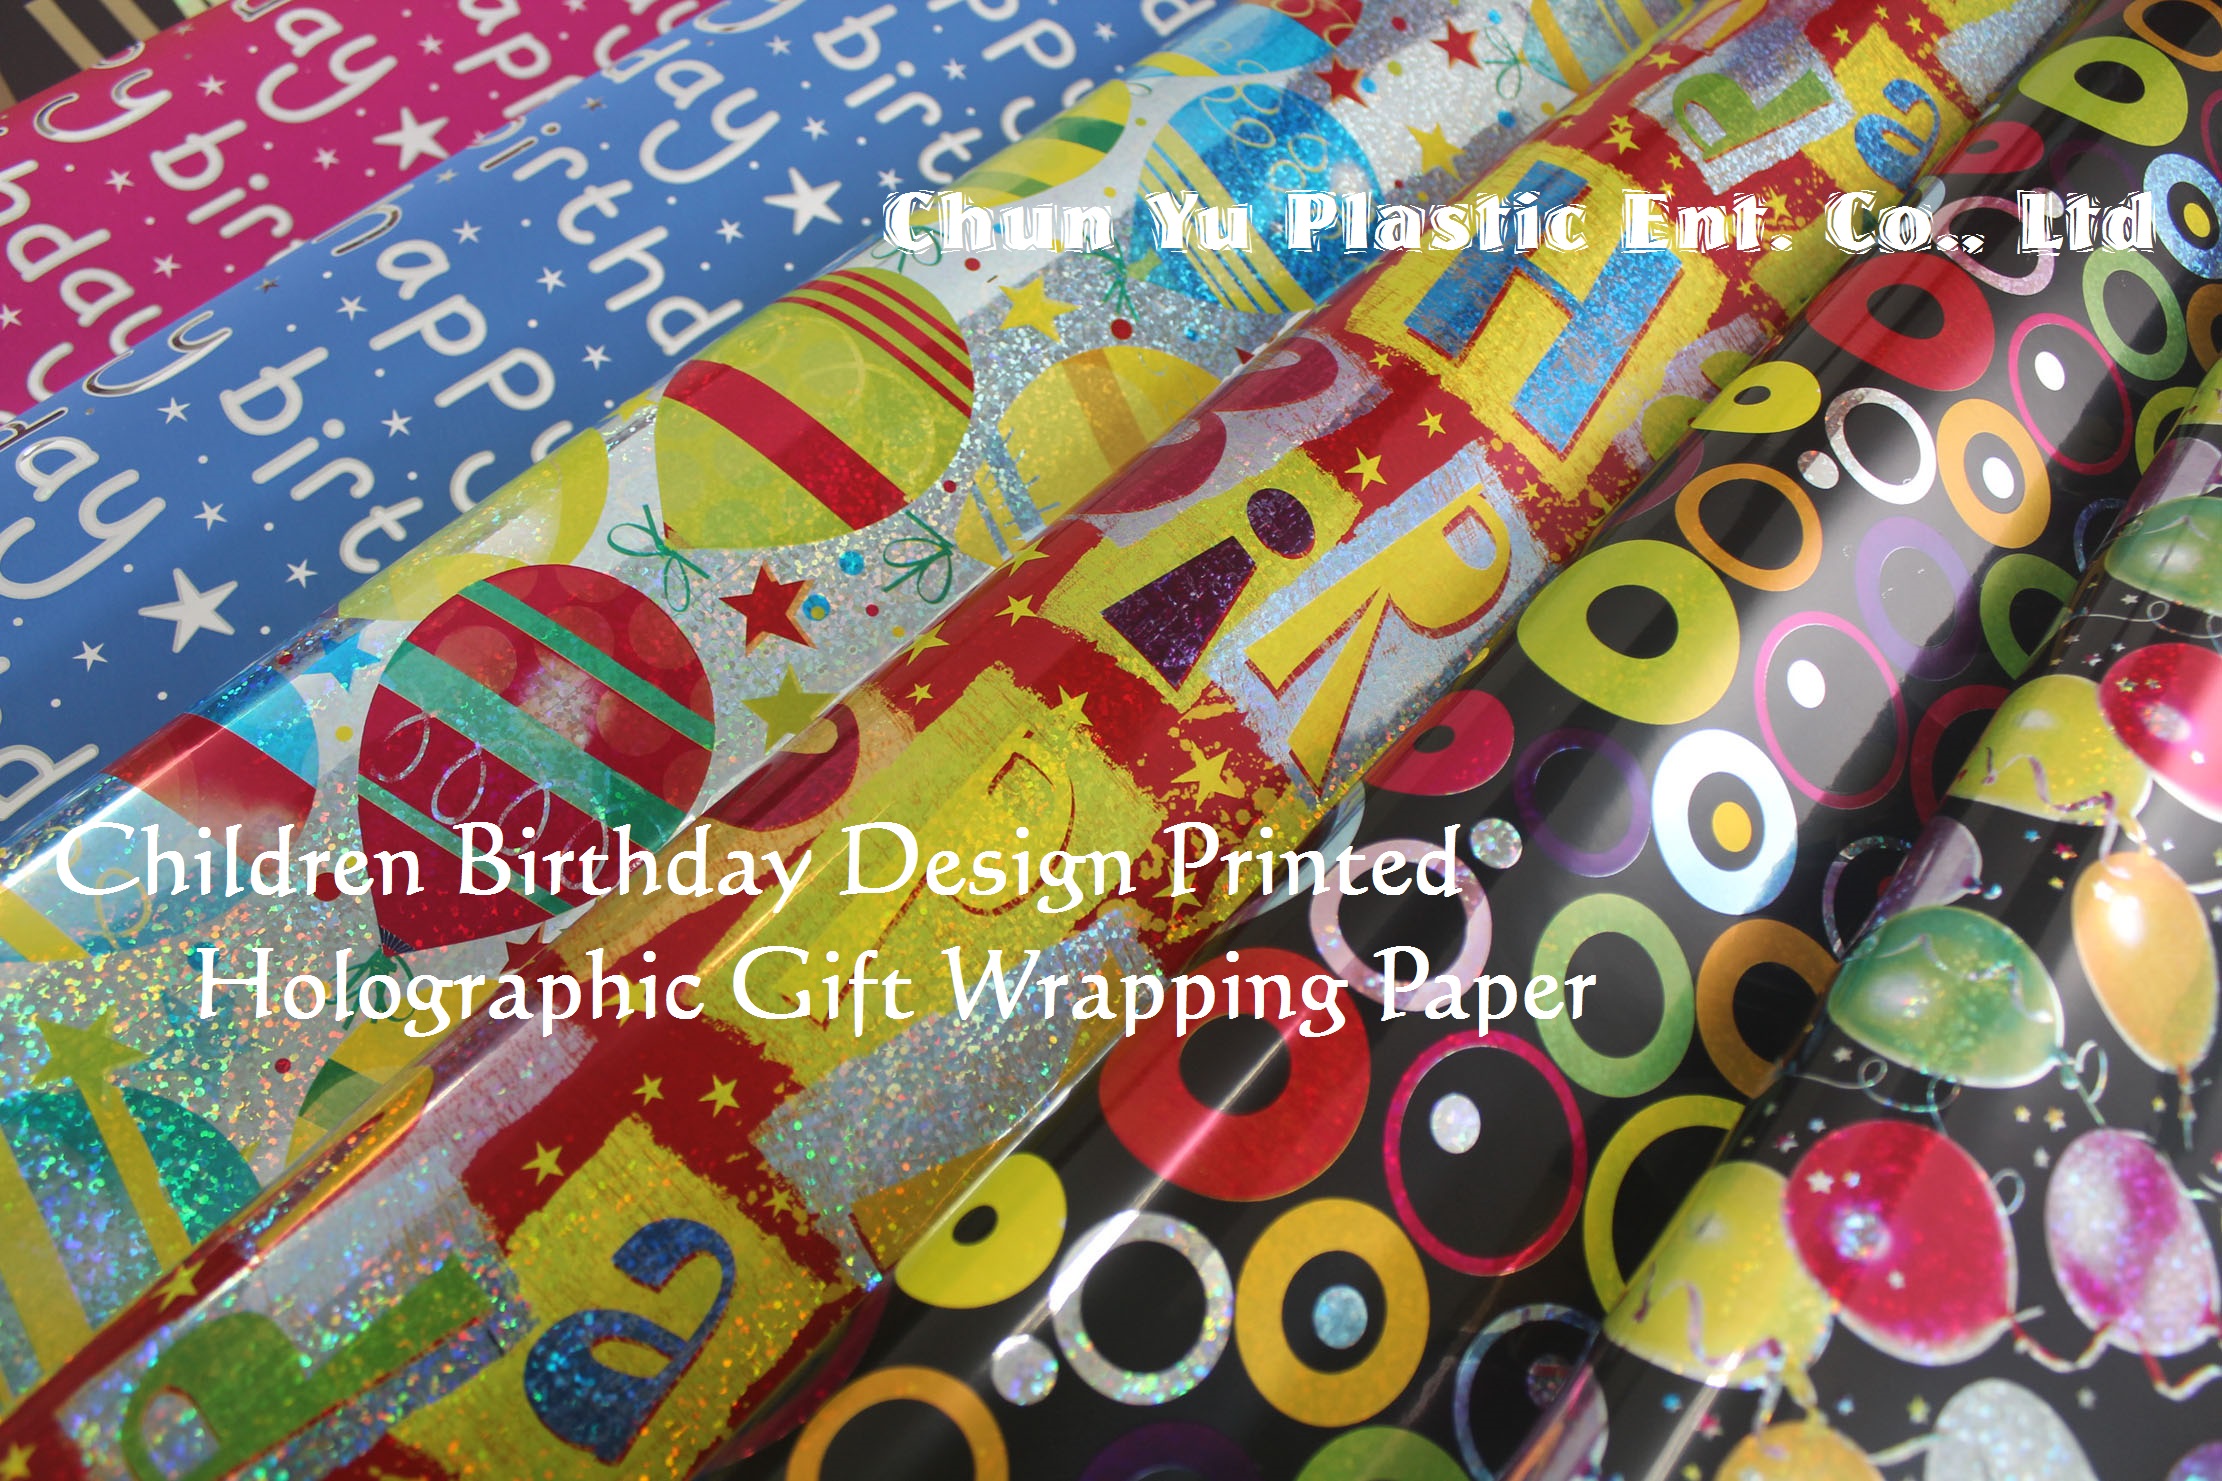 Holographic gift wrapping paper printed with kid designs for birthday and celebration parties. Our birthday holographic wrapping paper includes girls and boys designs.